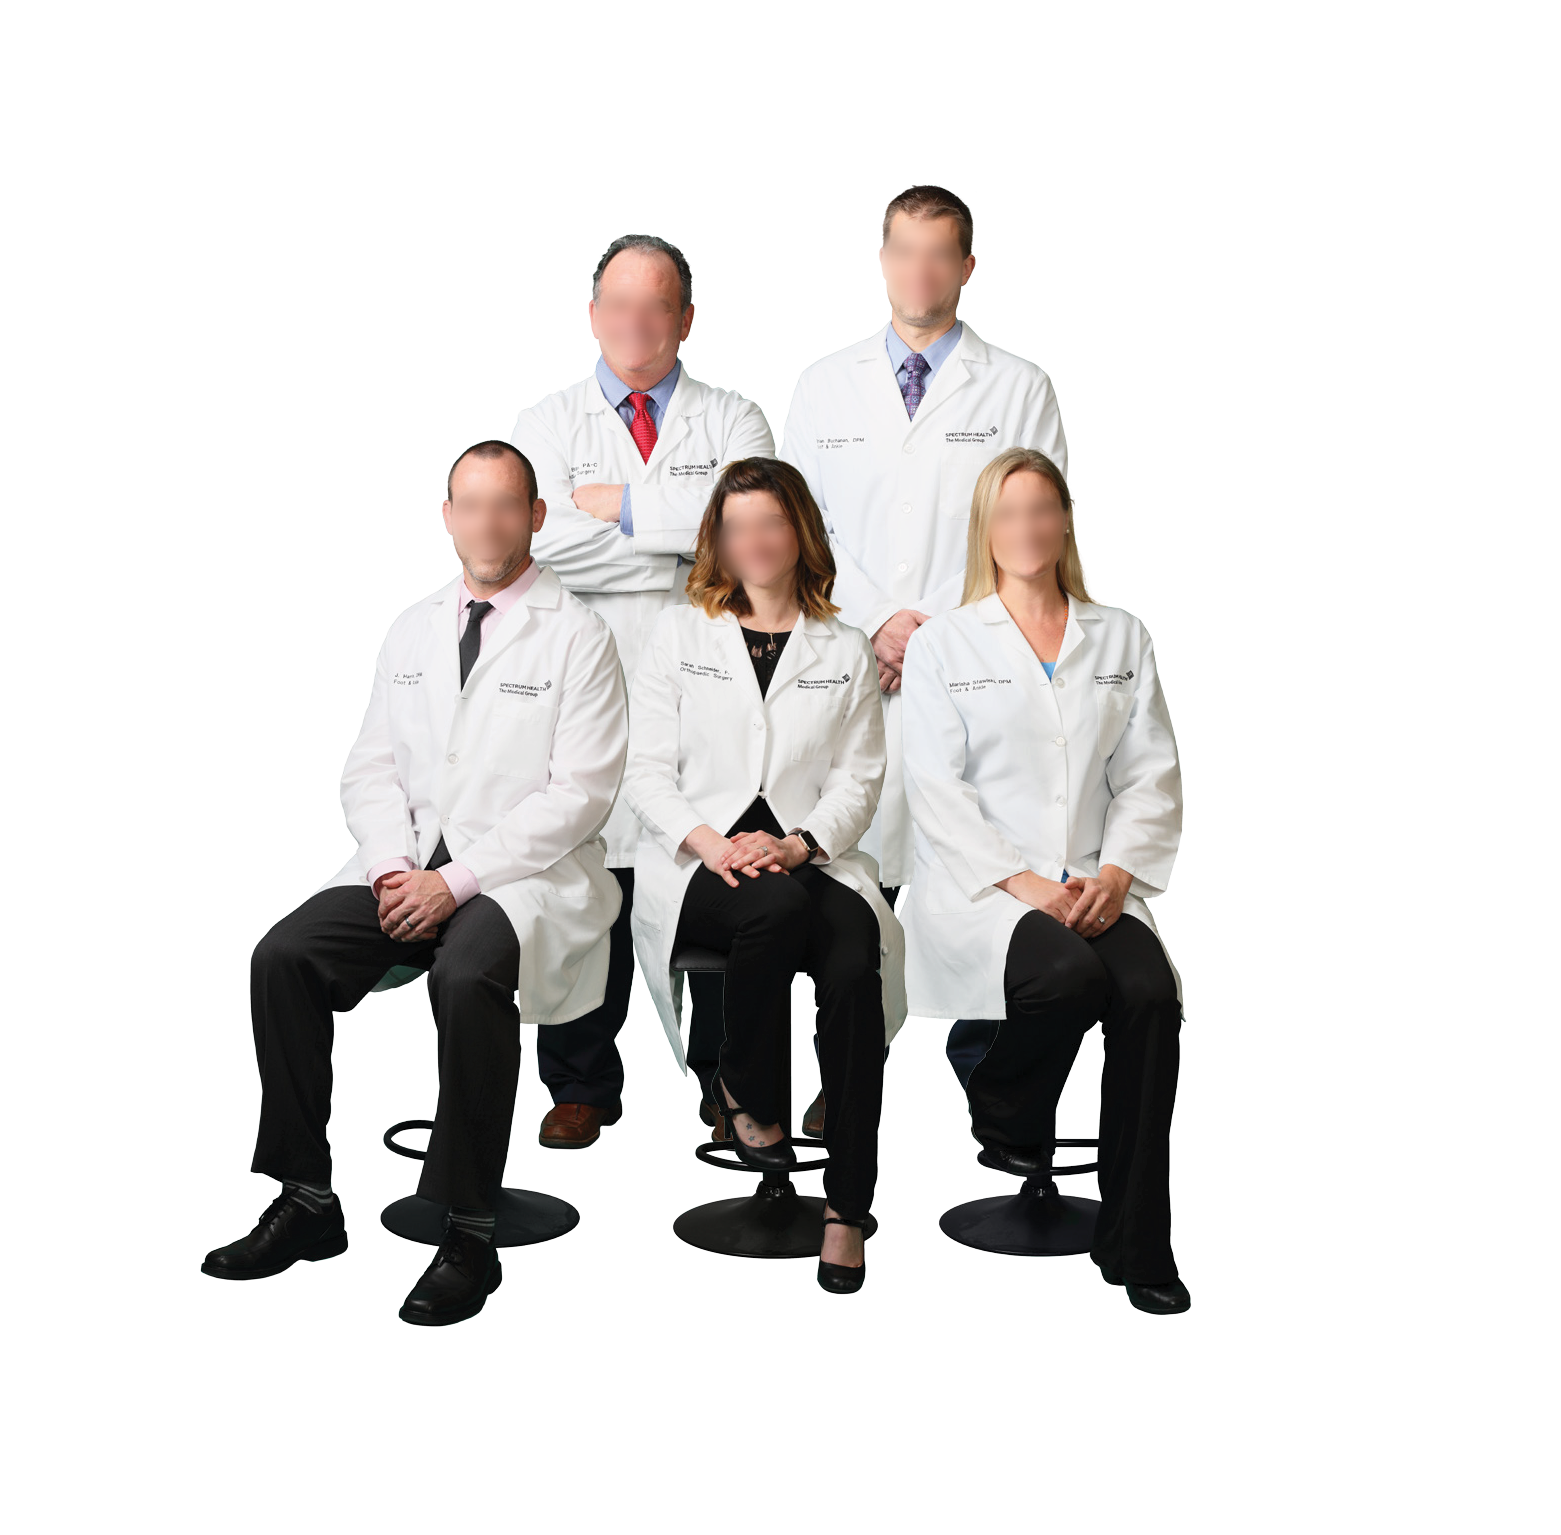 17.52.9.F - Group Images of Orthopedics Teams - Without Names-2.png